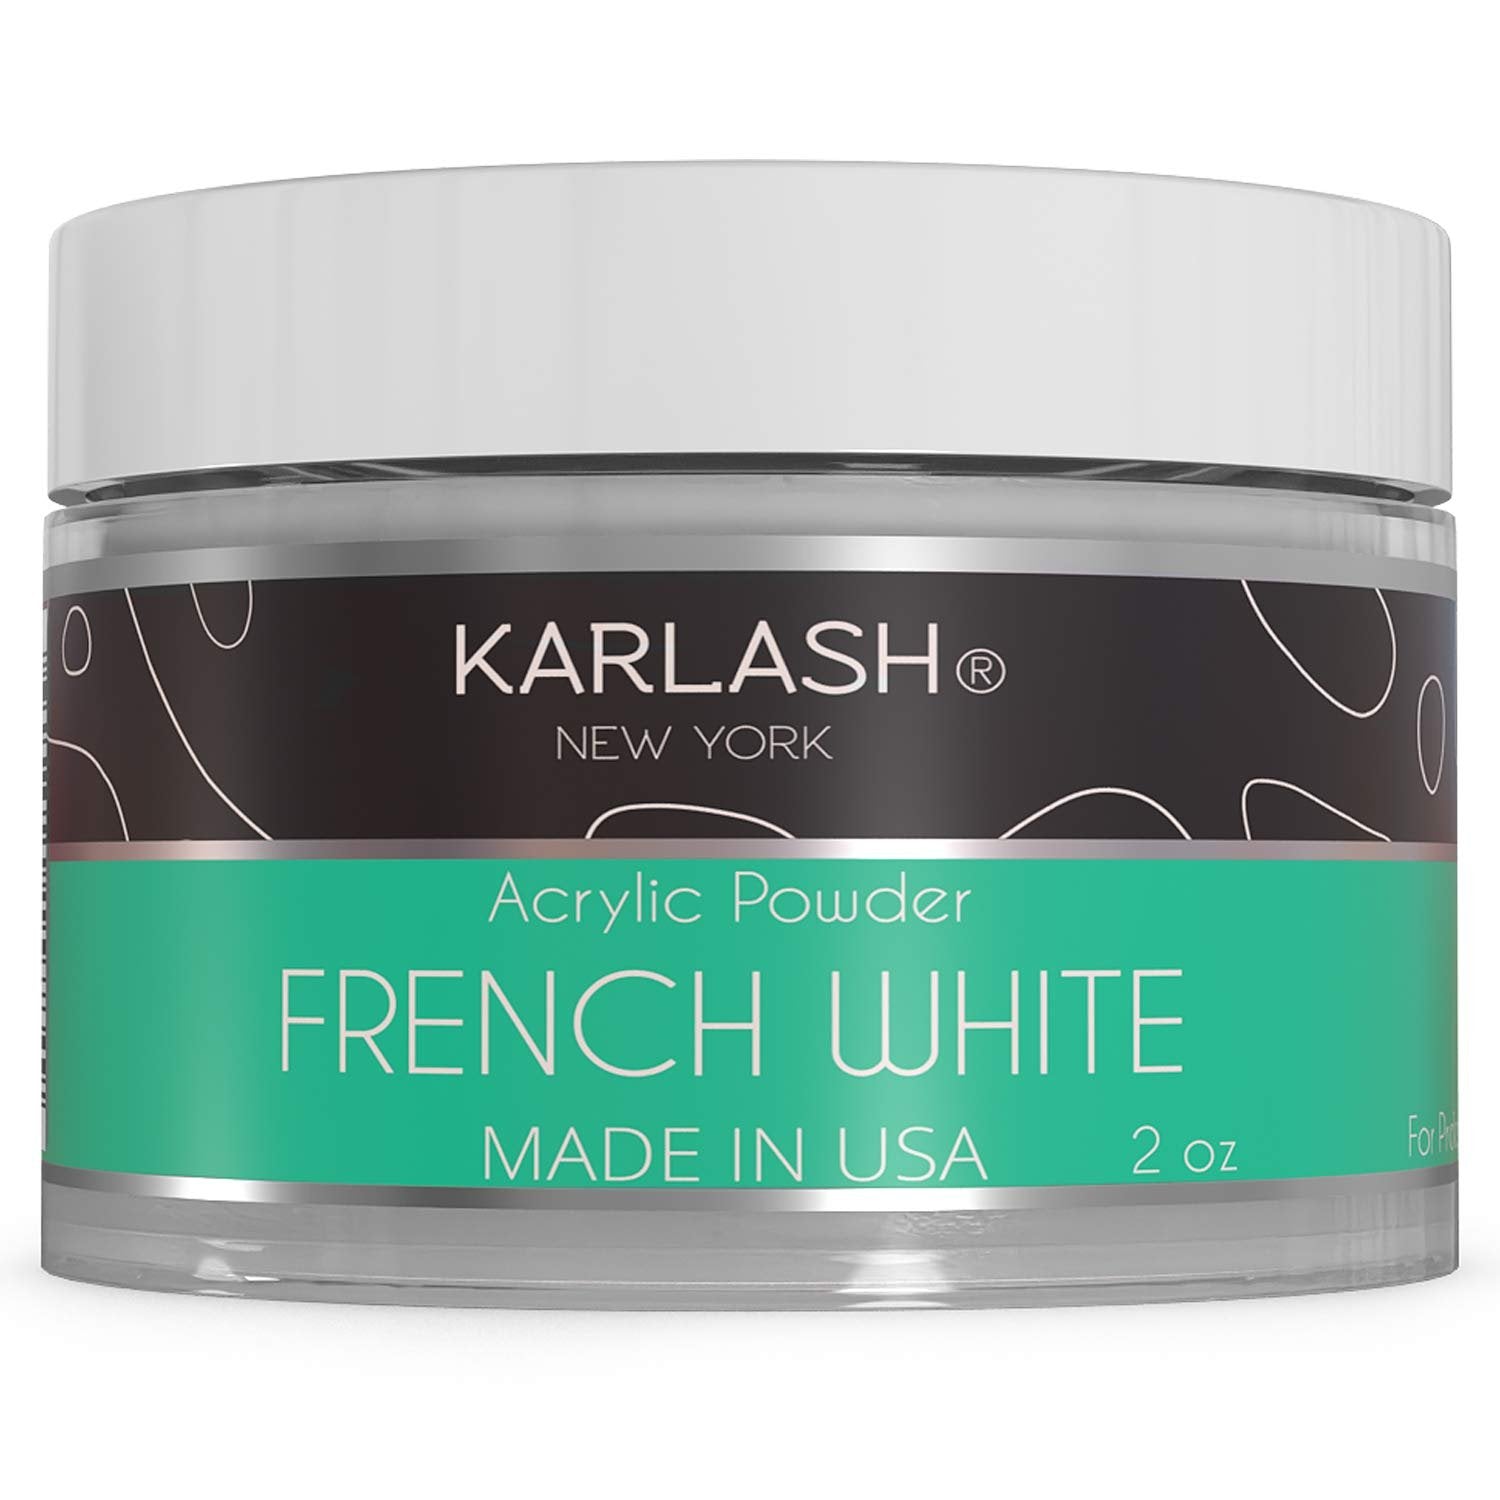 Karlash BUILDER GEL IN A BOTTLE + with detailed FRENCH NAIL